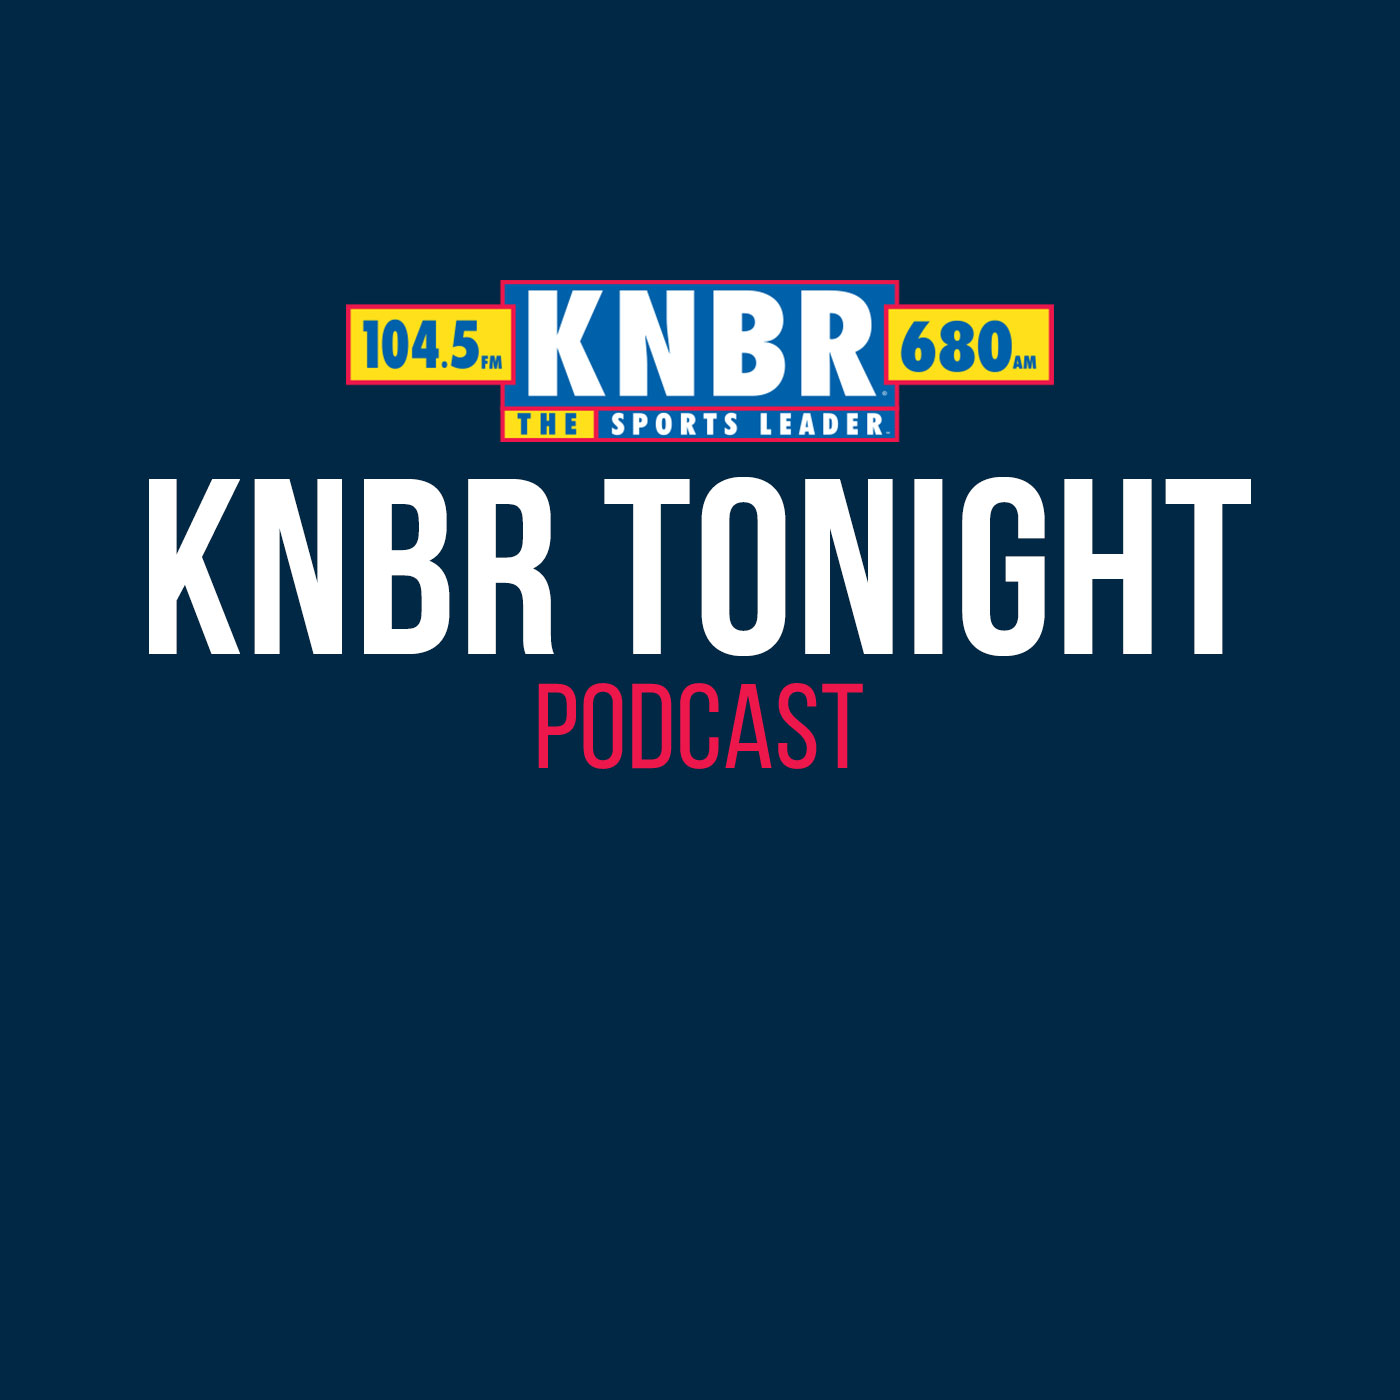 1-16 Tracy Sandler joins Kerry Crowley on SportsPhone KNBR to discuss upcoming 49ers vs. Packers matchup